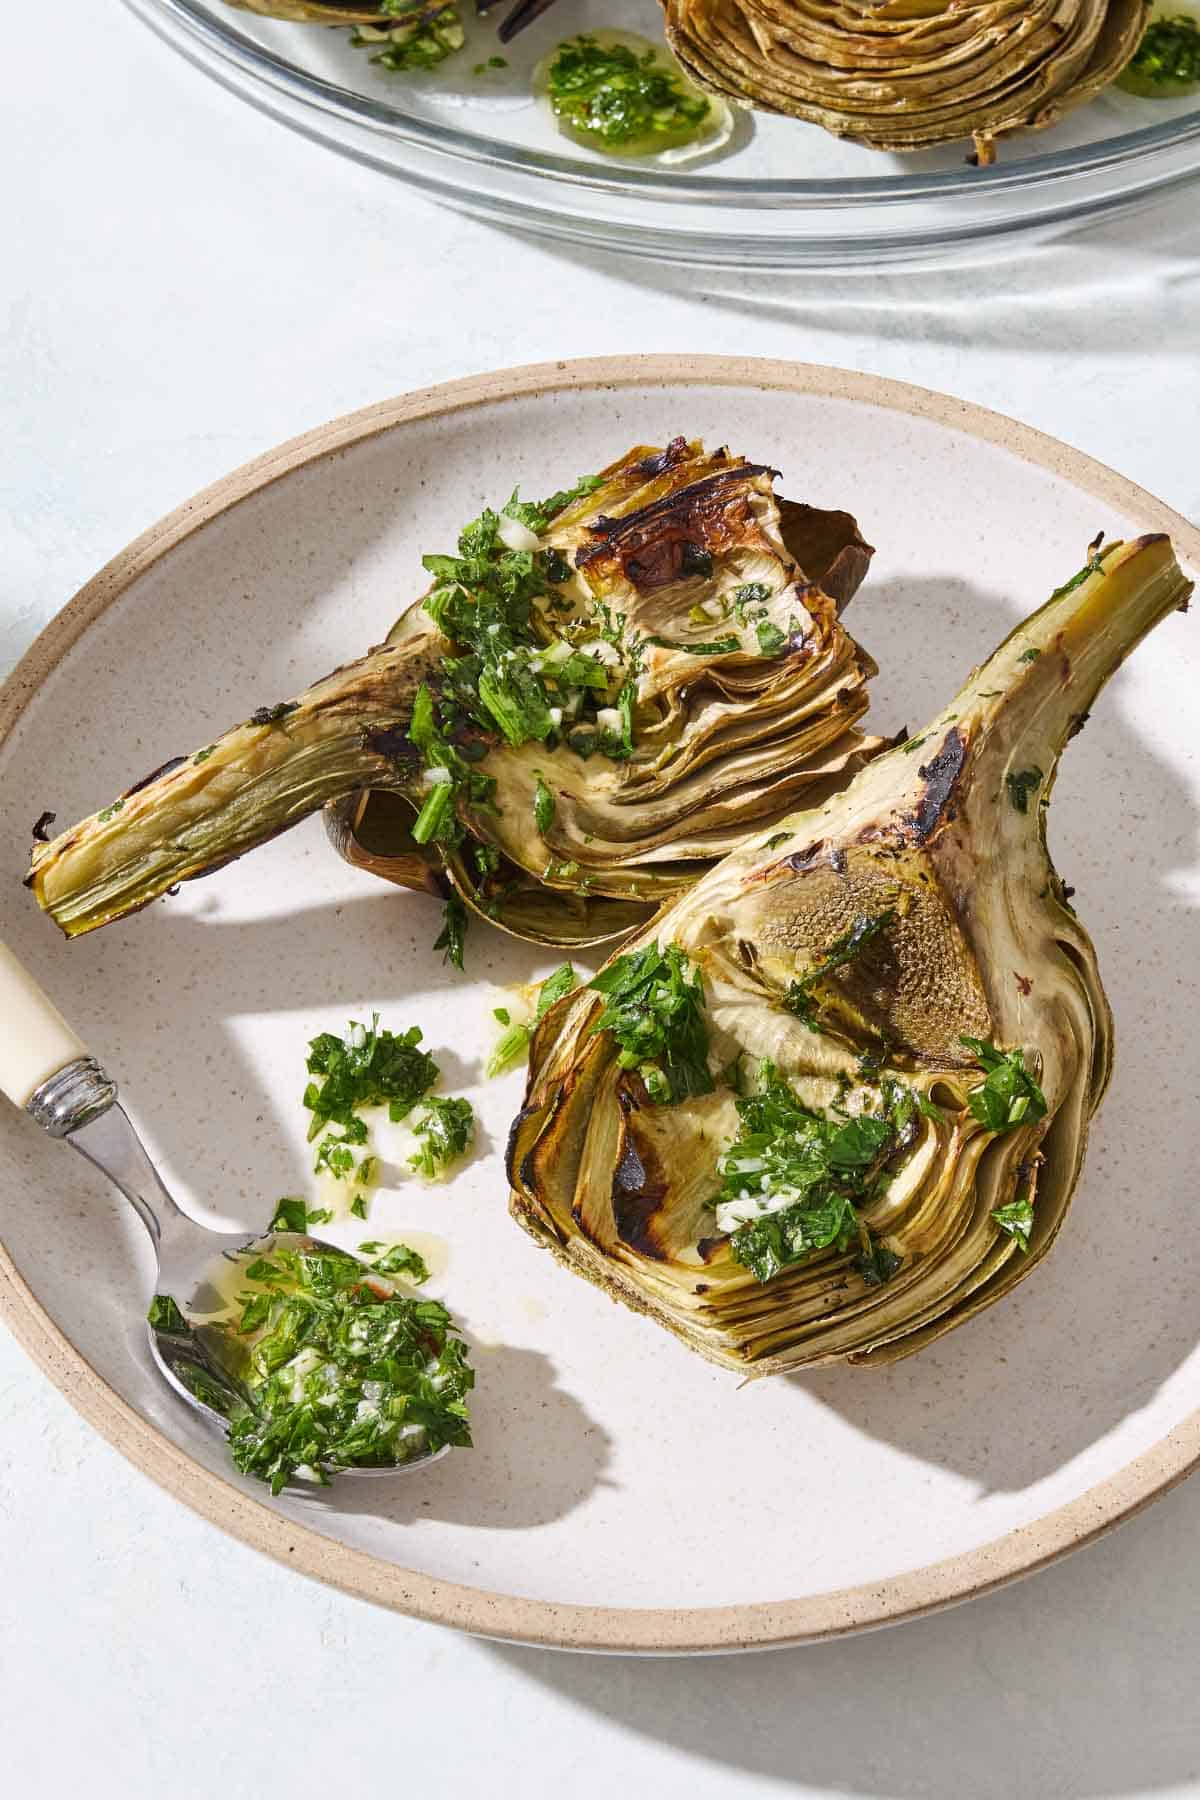 Two grilled artichoke quarters drizzled with marinade on a plate with a spoon.